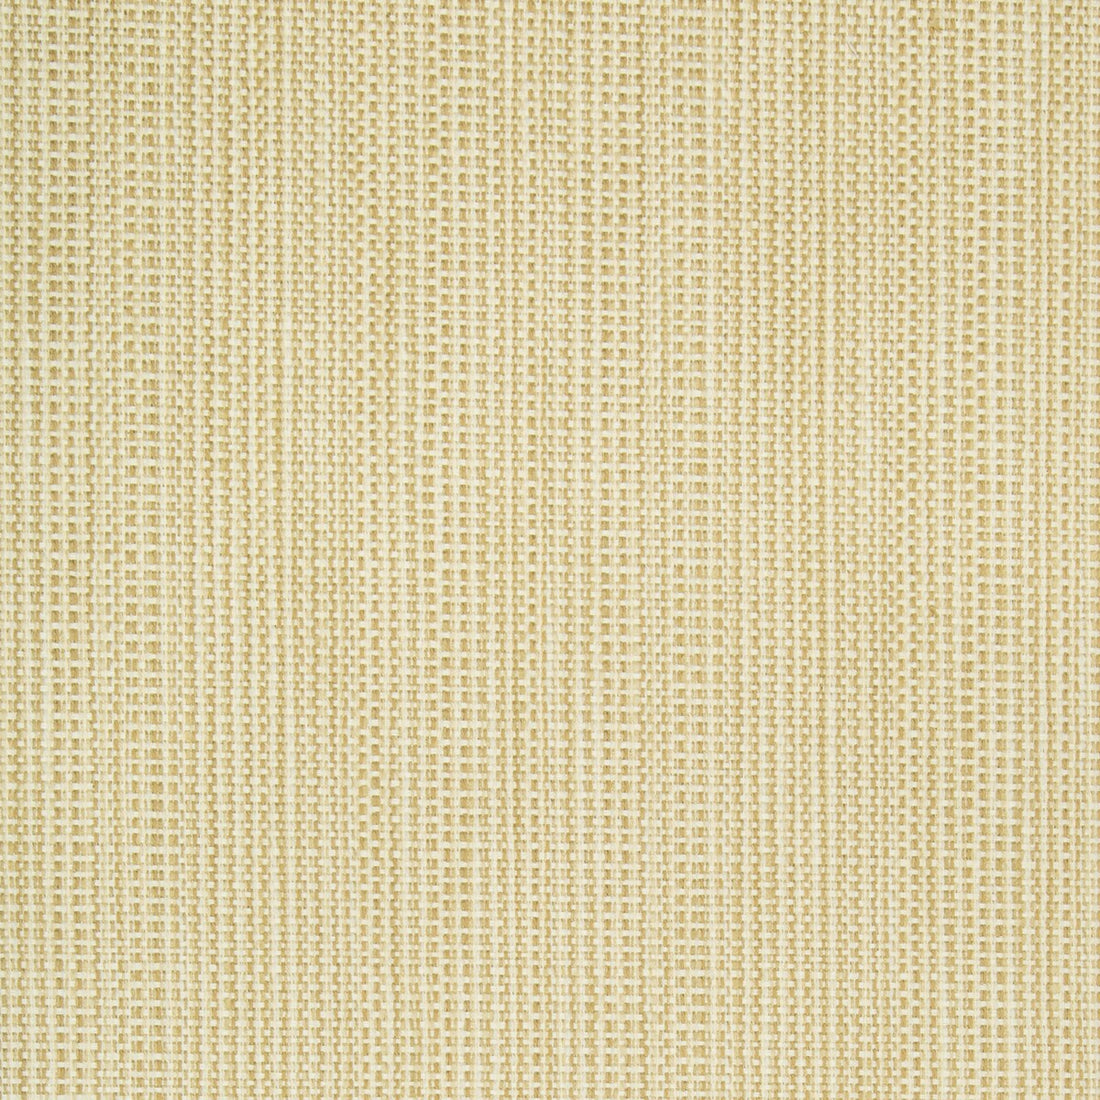 Kravet Contract fabric in 34634-16 color - pattern 34634.16.0 - by Kravet Contract in the Crypton Incase collection